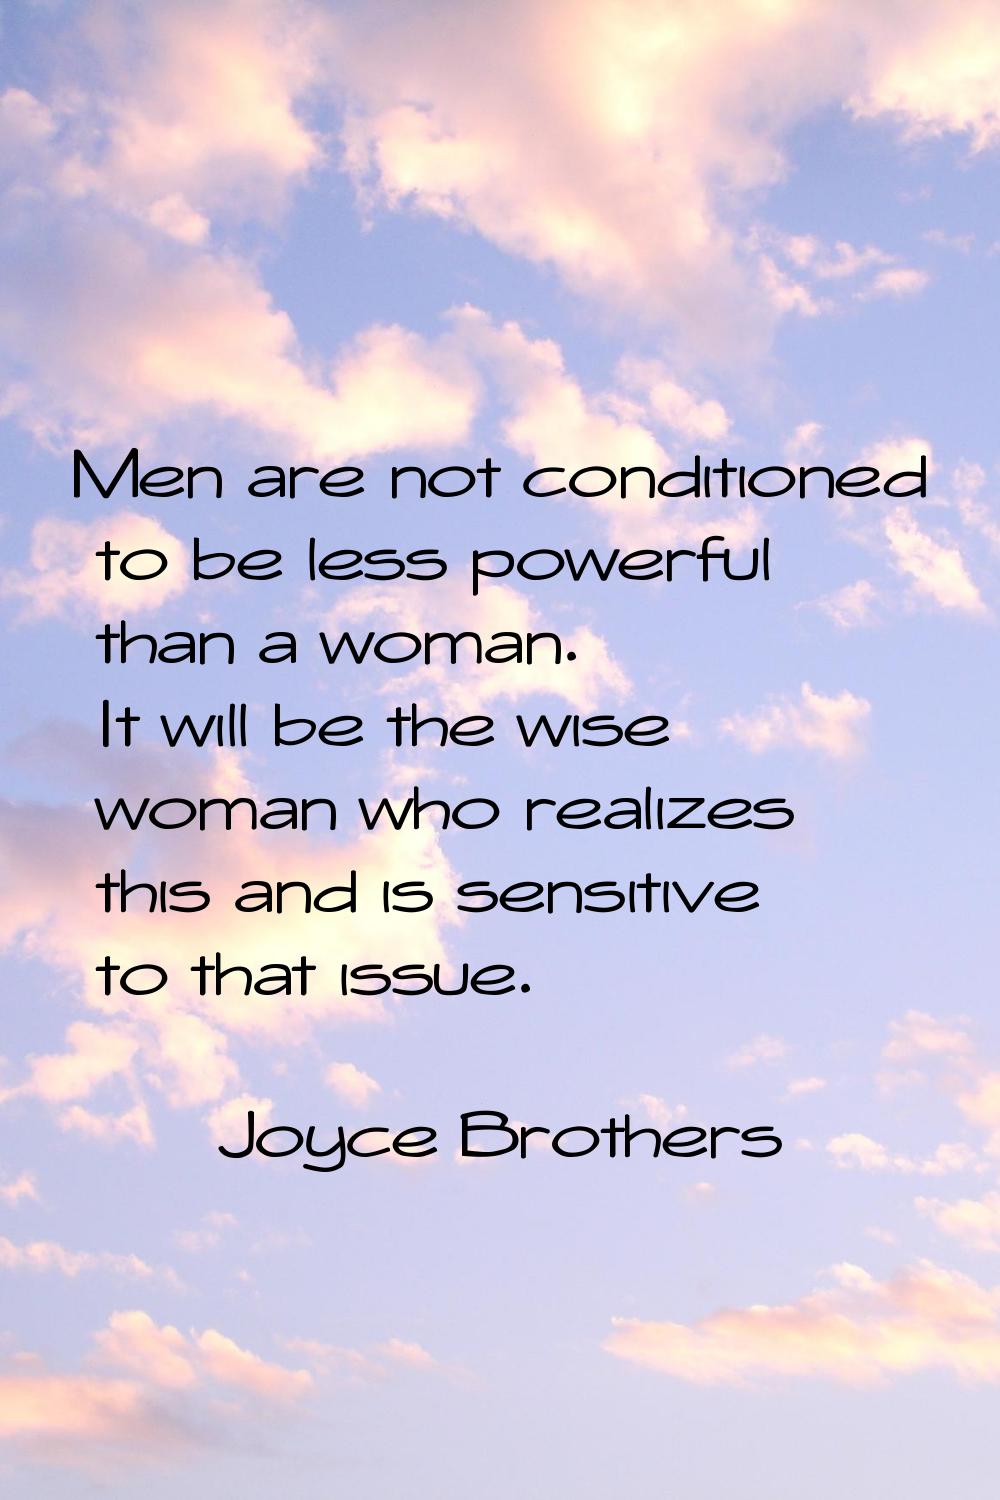 Men are not conditioned to be less powerful than a woman. It will be the wise woman who realizes th